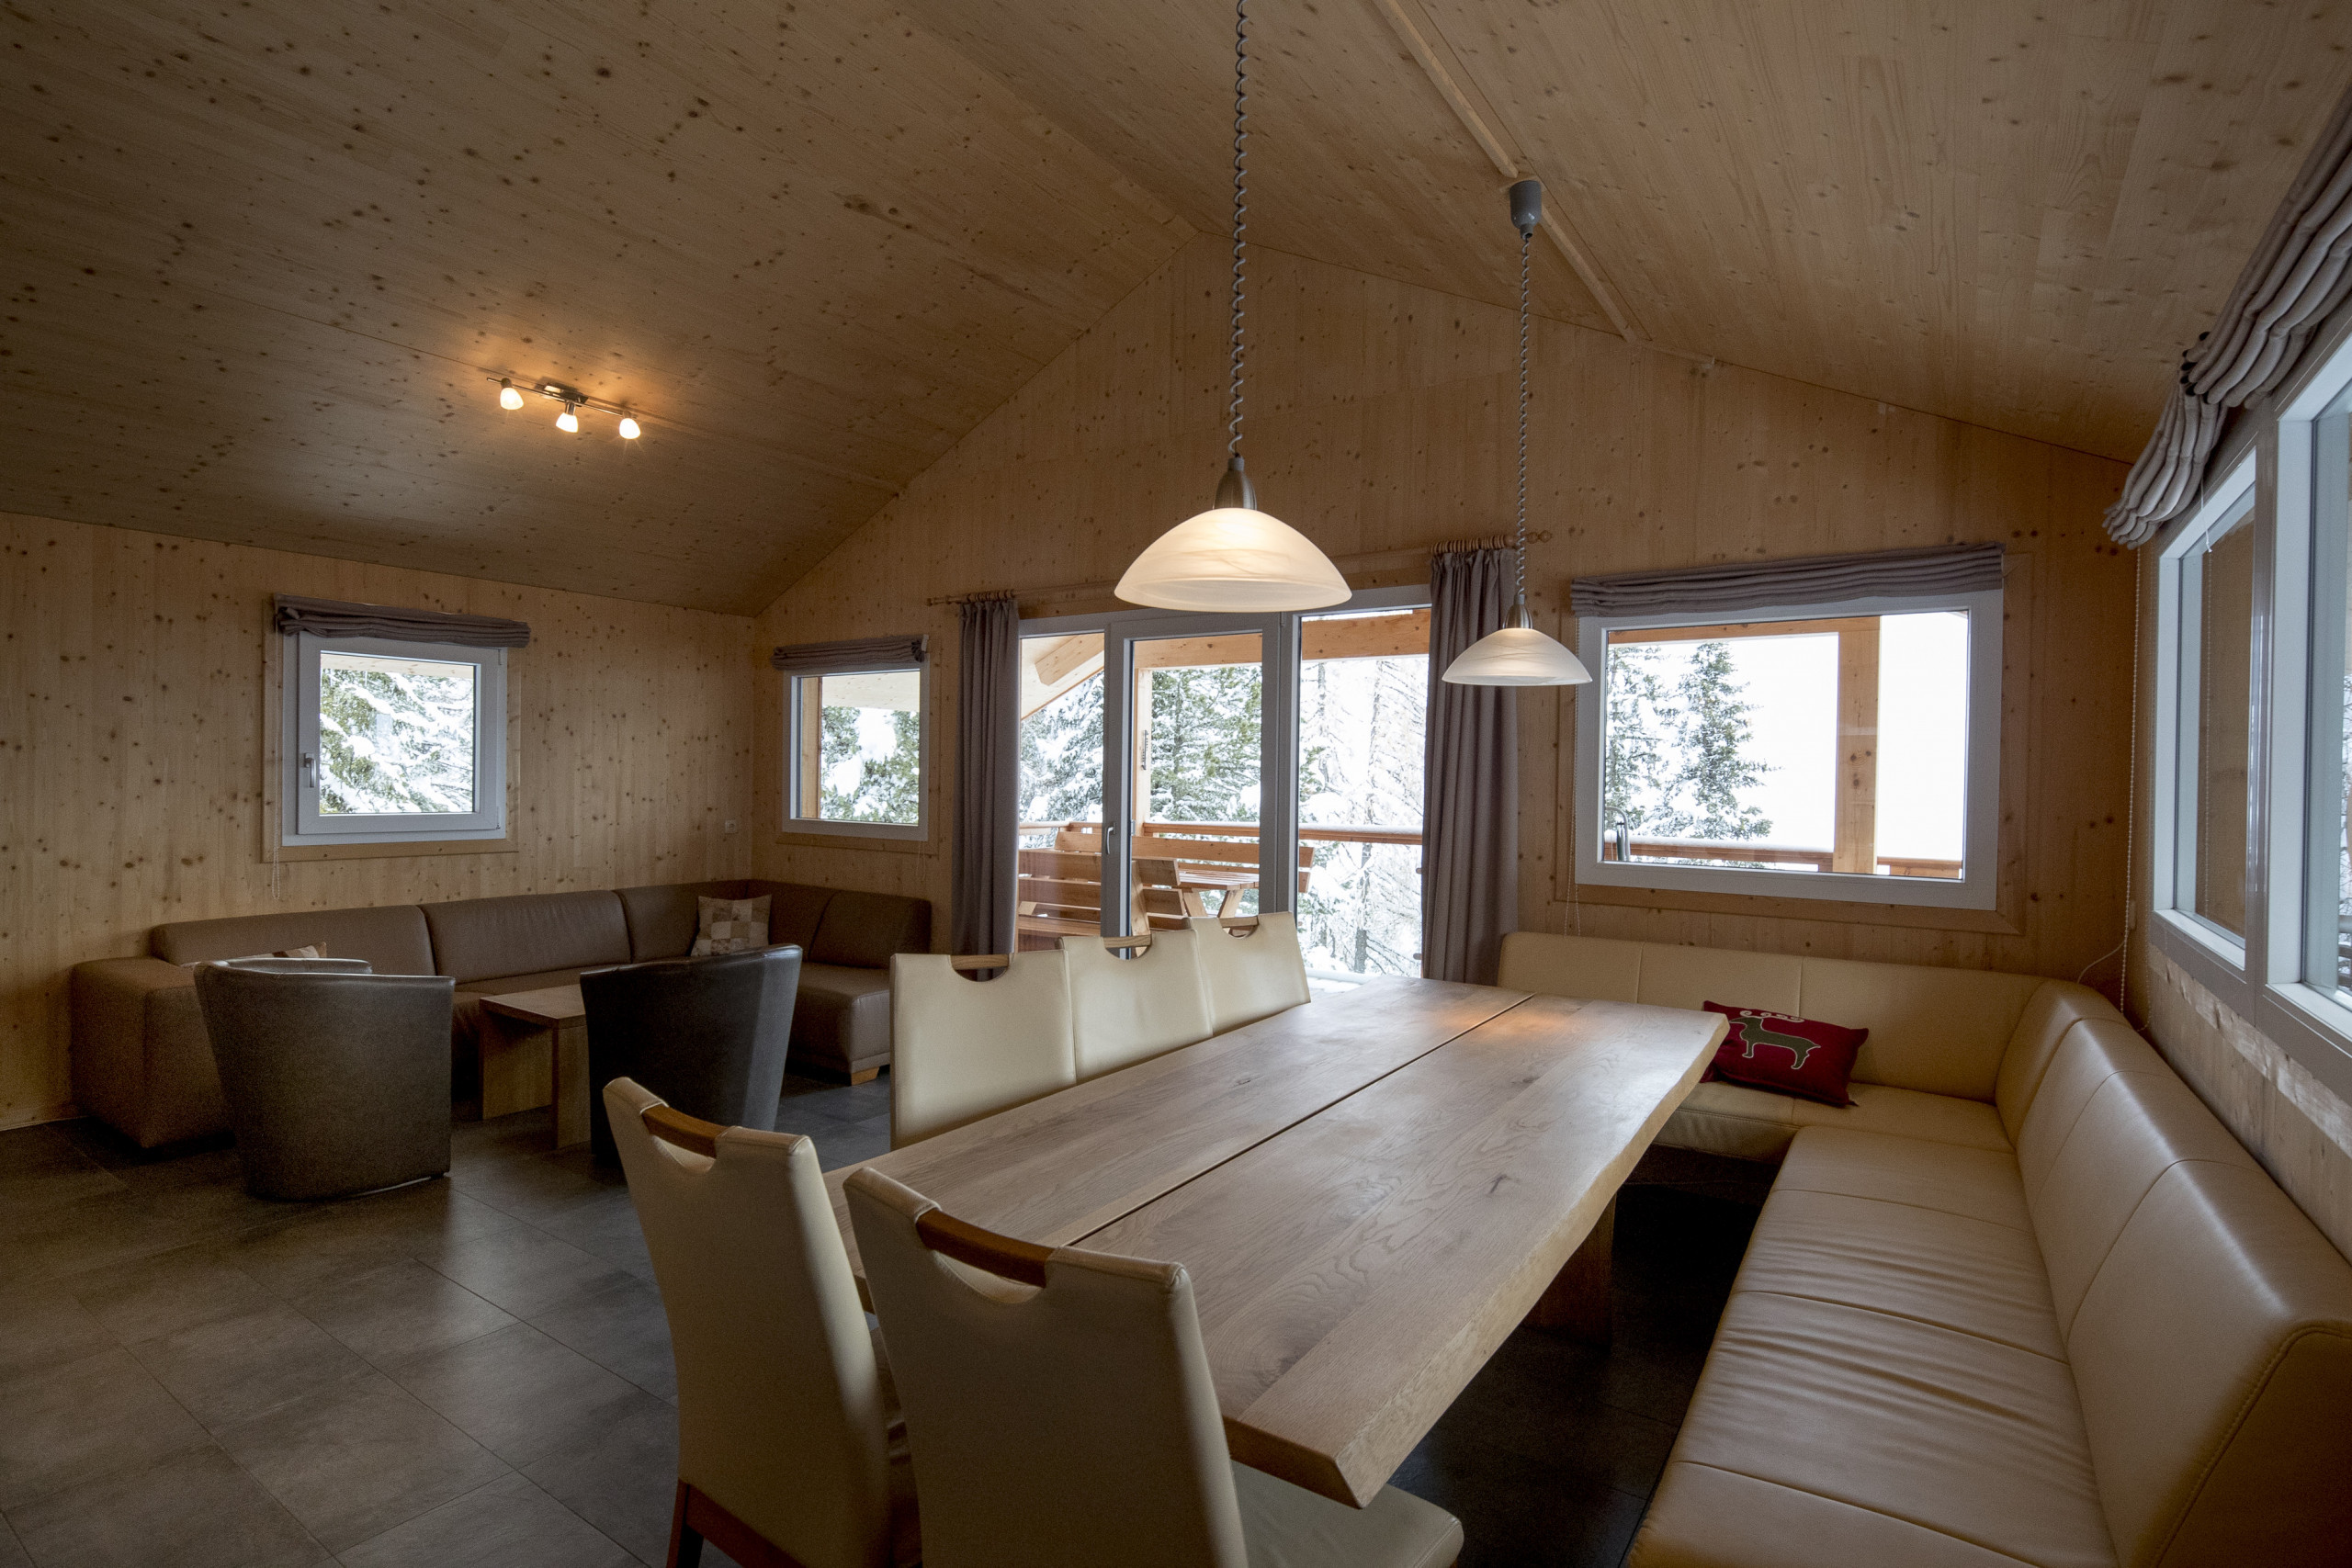  in Turrach - Chalet # 43 with sauna and indoor whirlpool